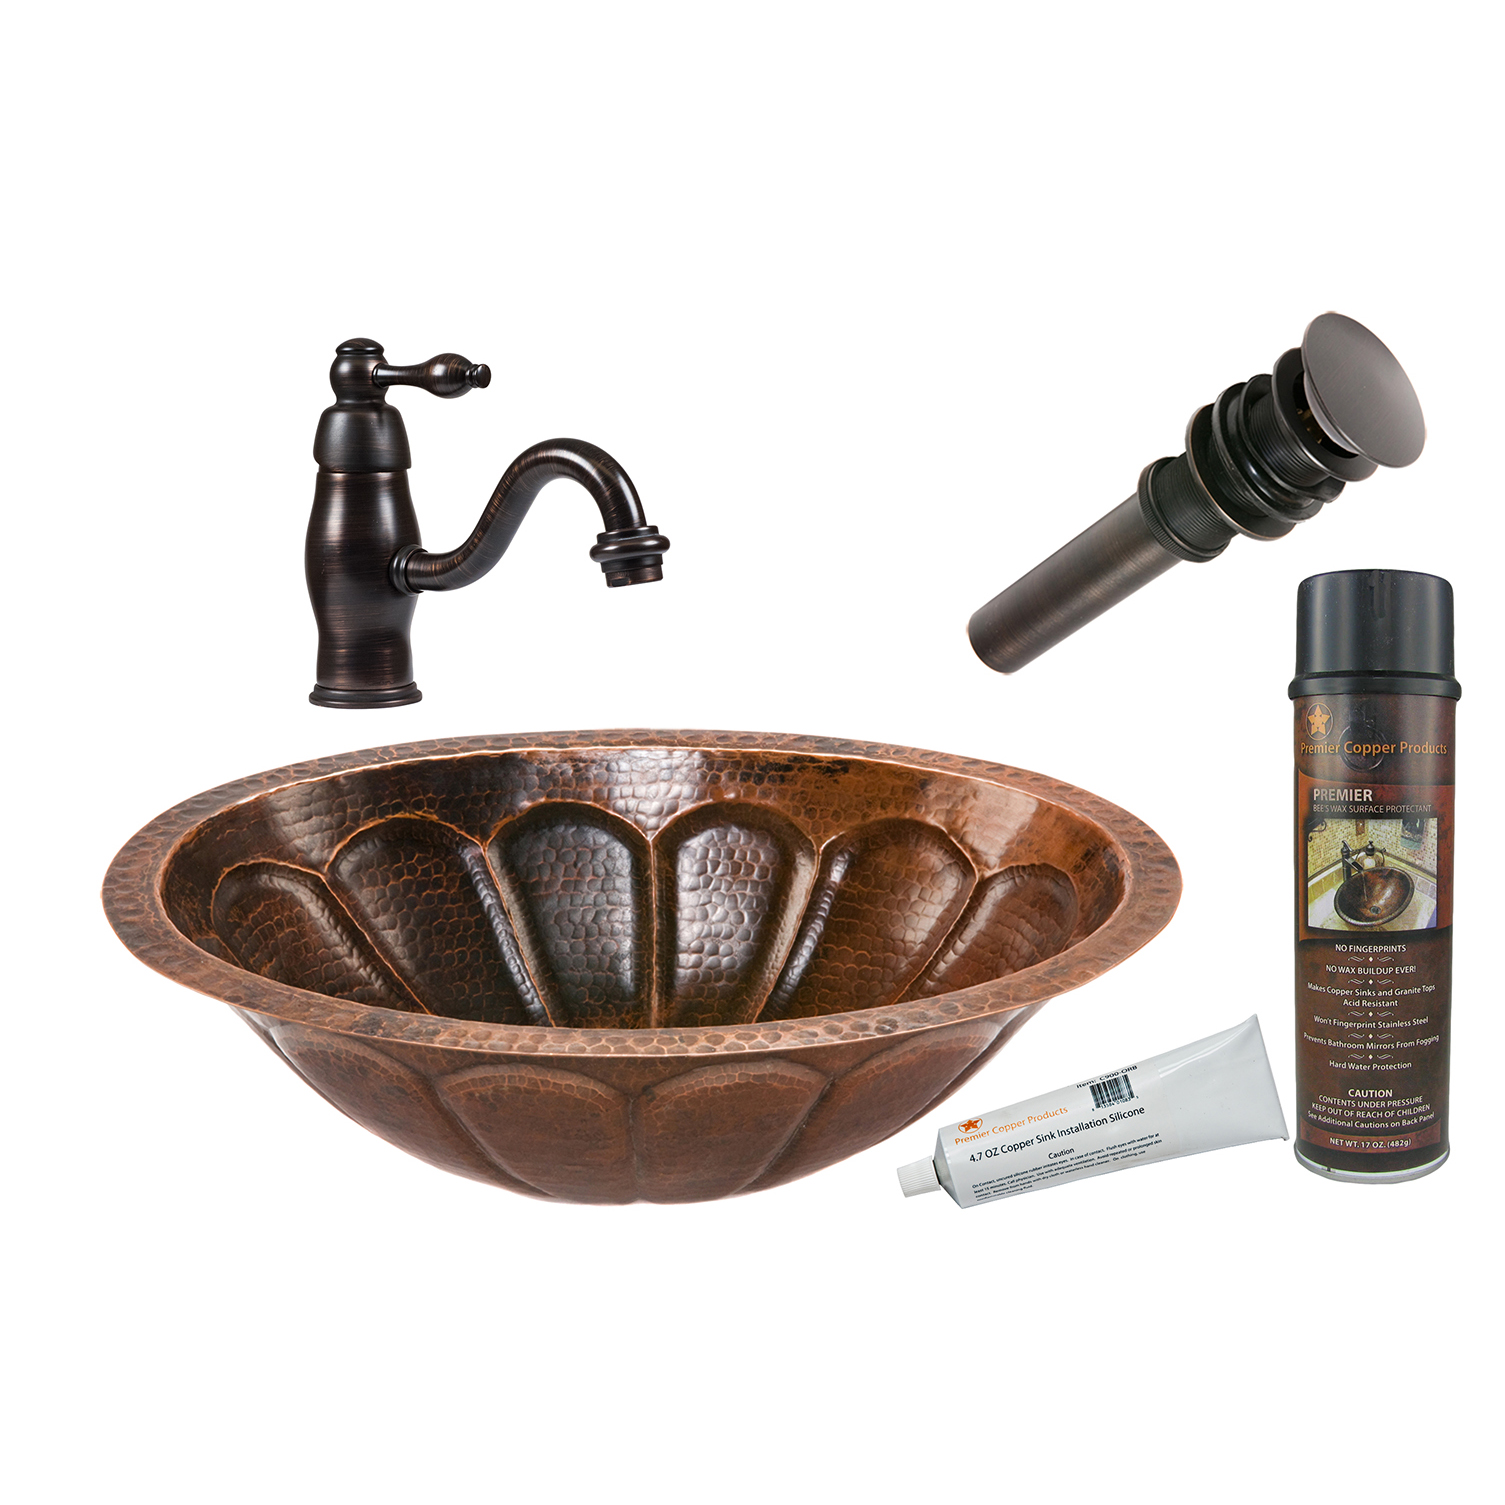 Oval Sunbrst Under Counter Hammered Copper Sink, Faucet And Accessories Package, Oil Rubbed Bronze